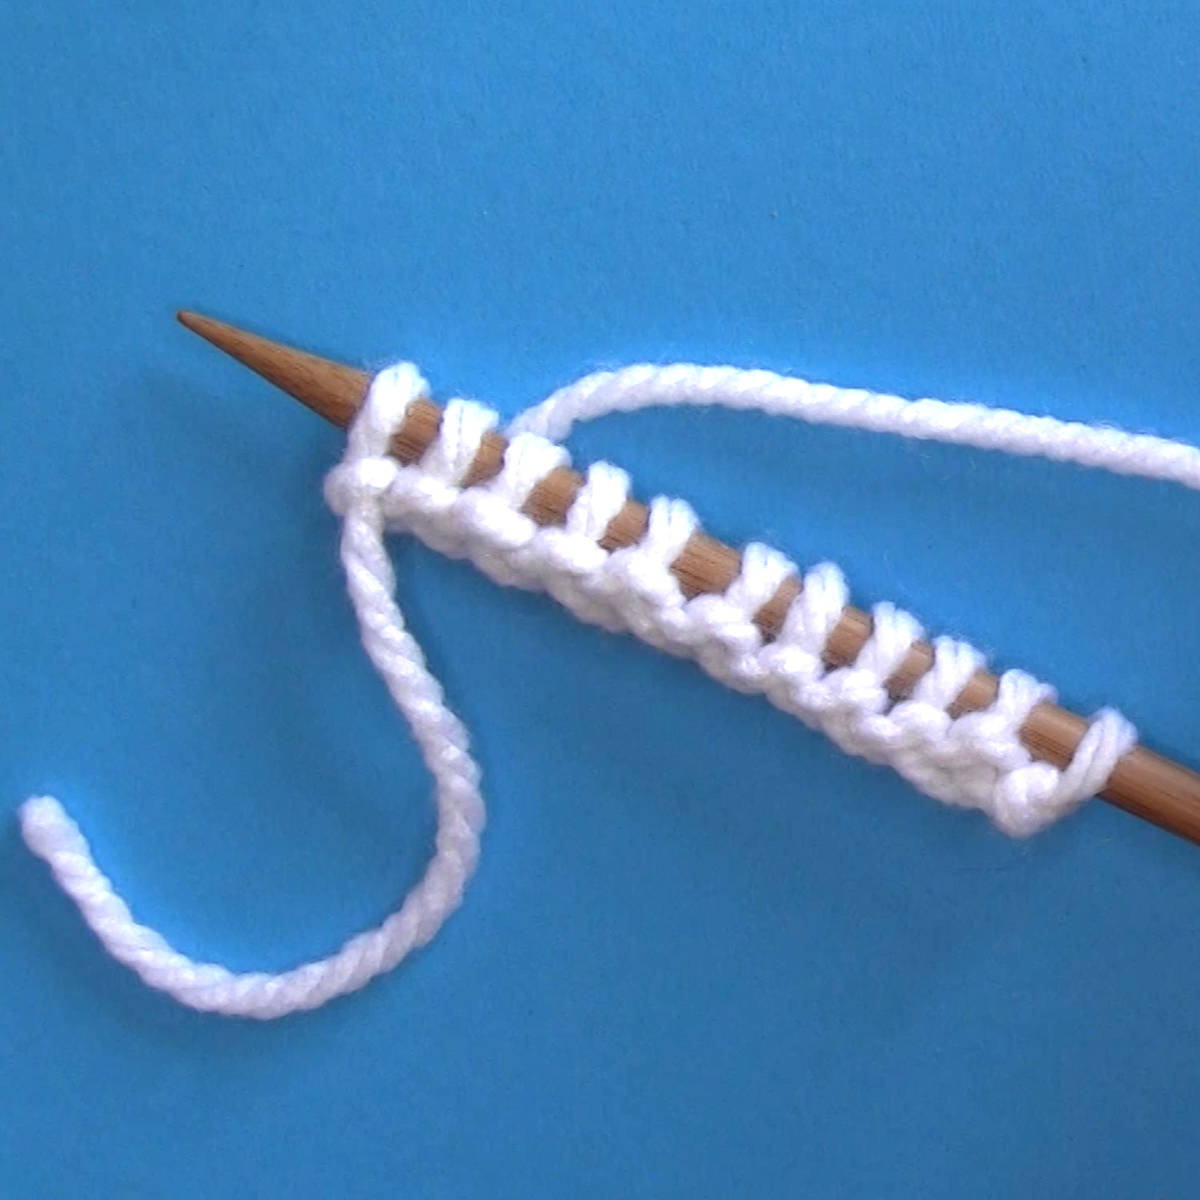 Knitting needle with stitches cast on purlwise in white color yarn on a blue background.